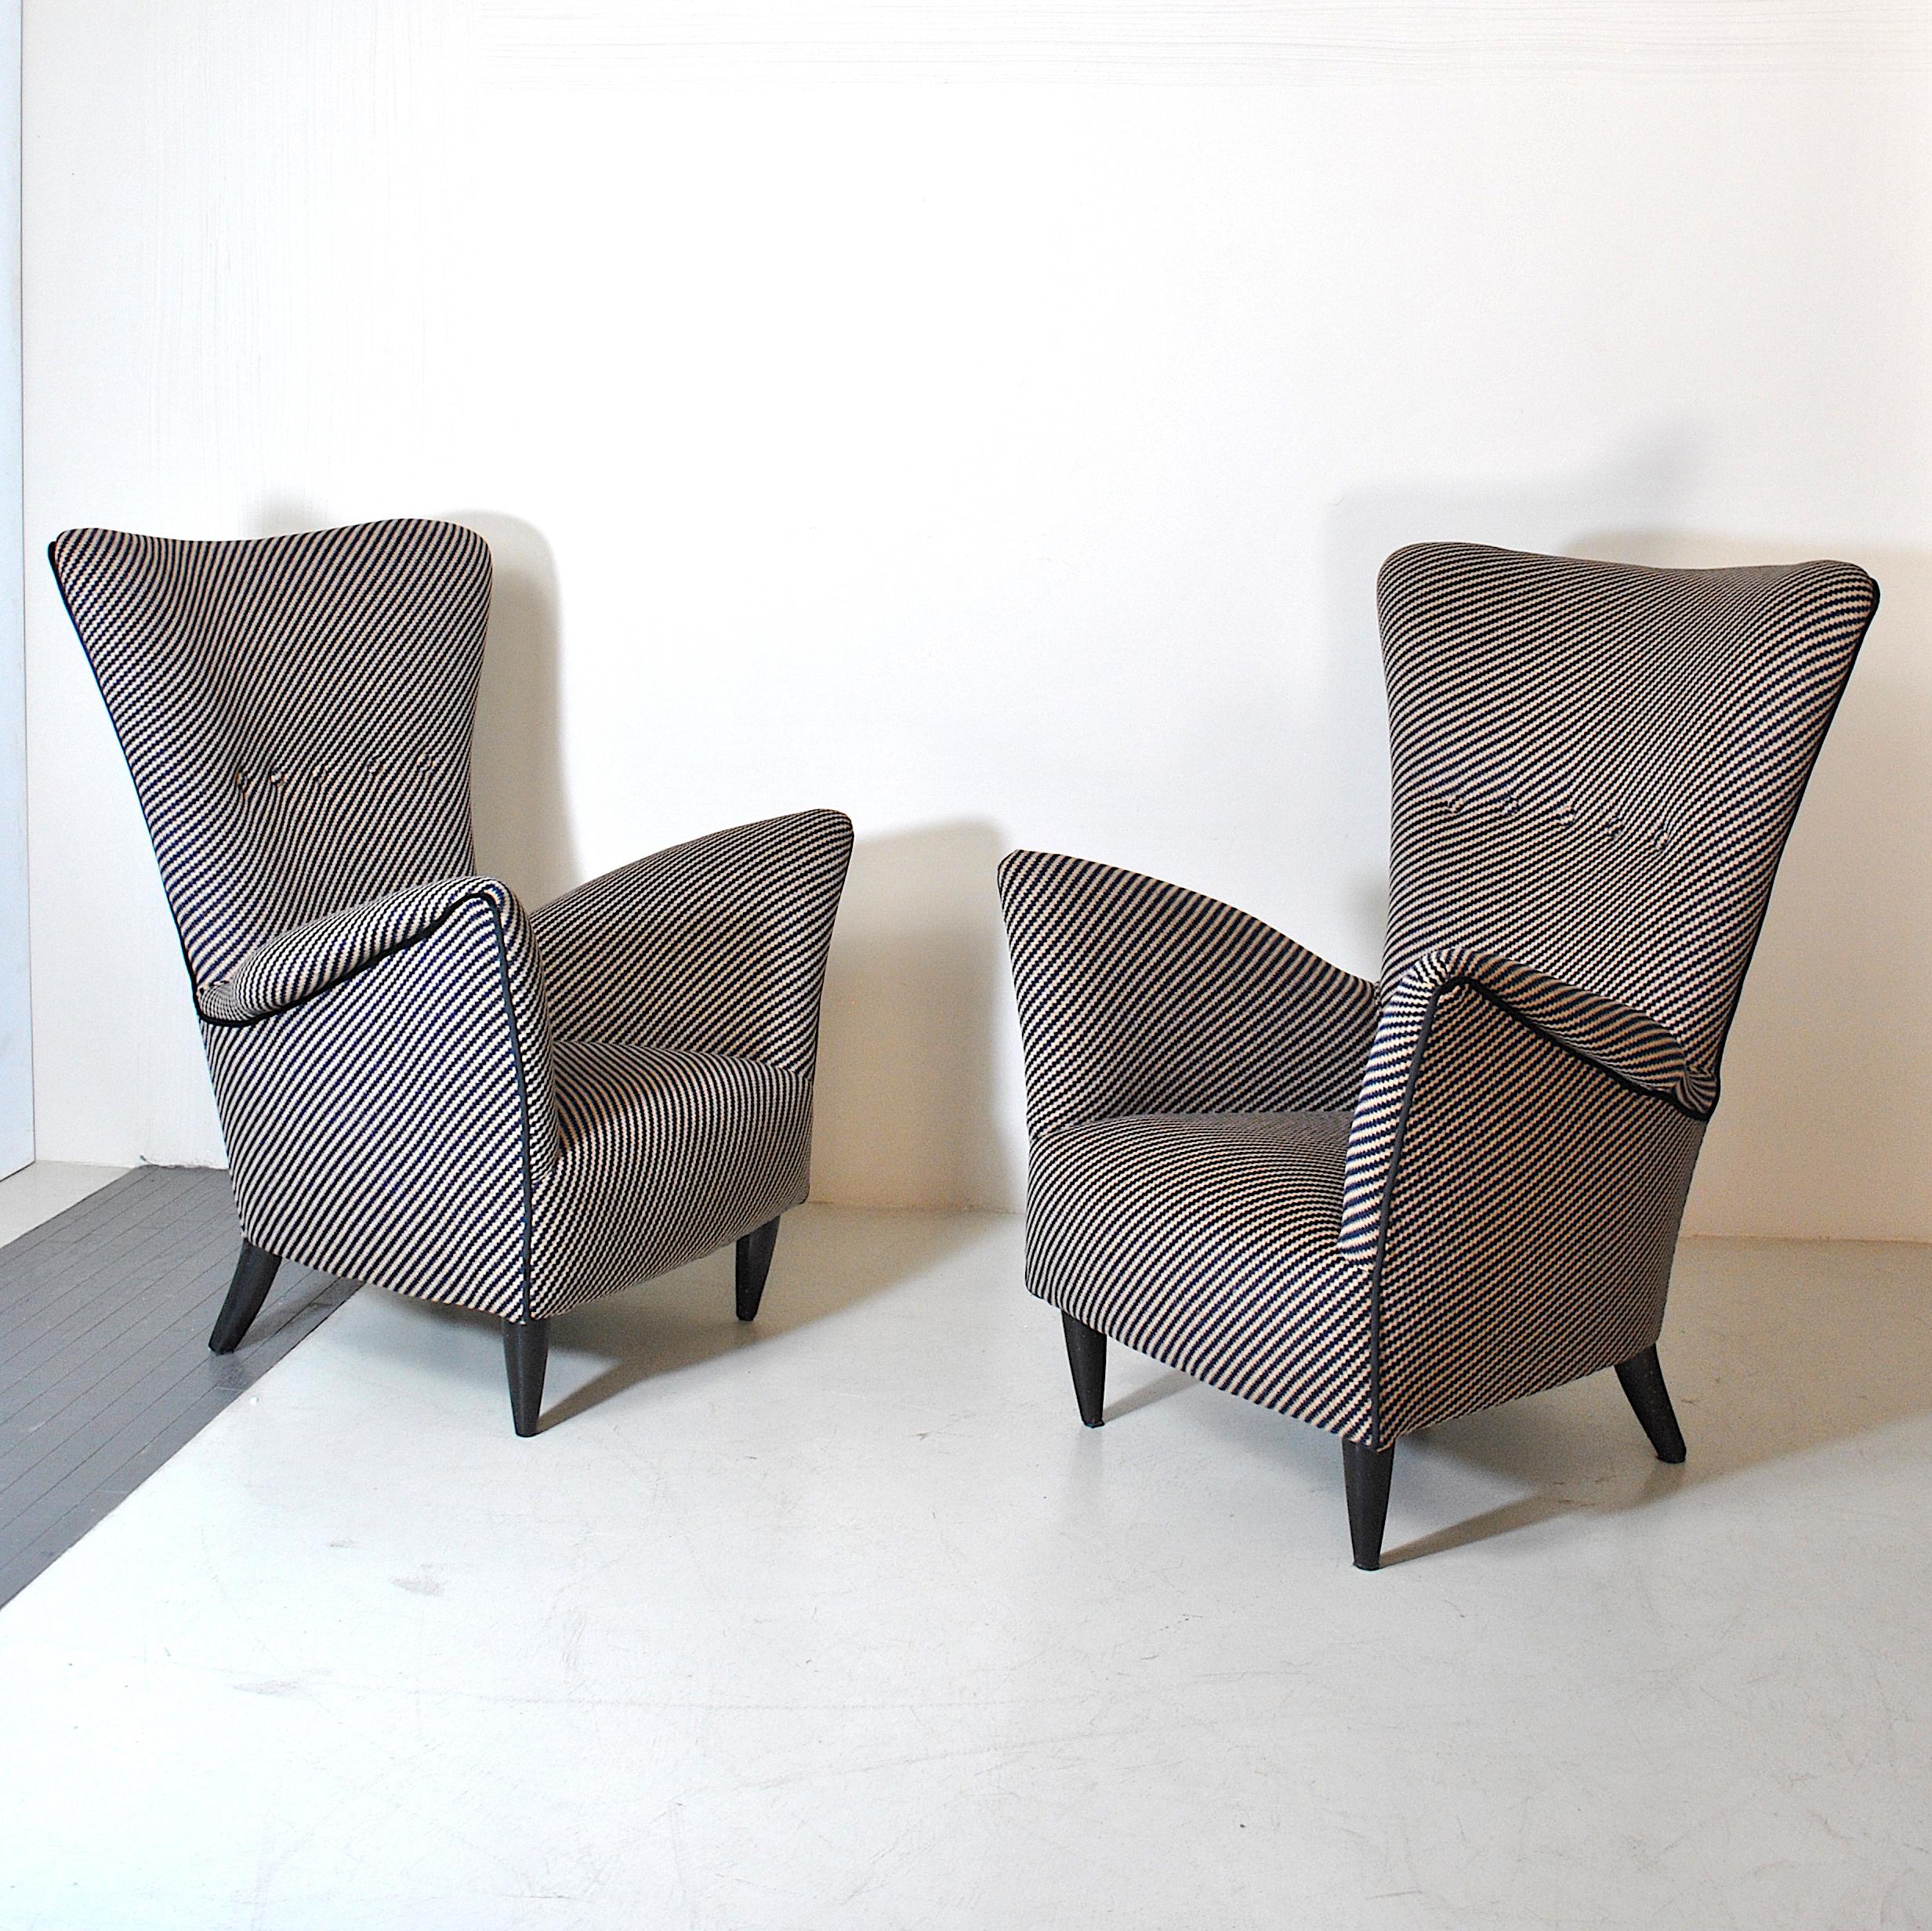 Set of two armchair produced for the Hotel Bristol Merano 1950s design Gio Ponti attr.